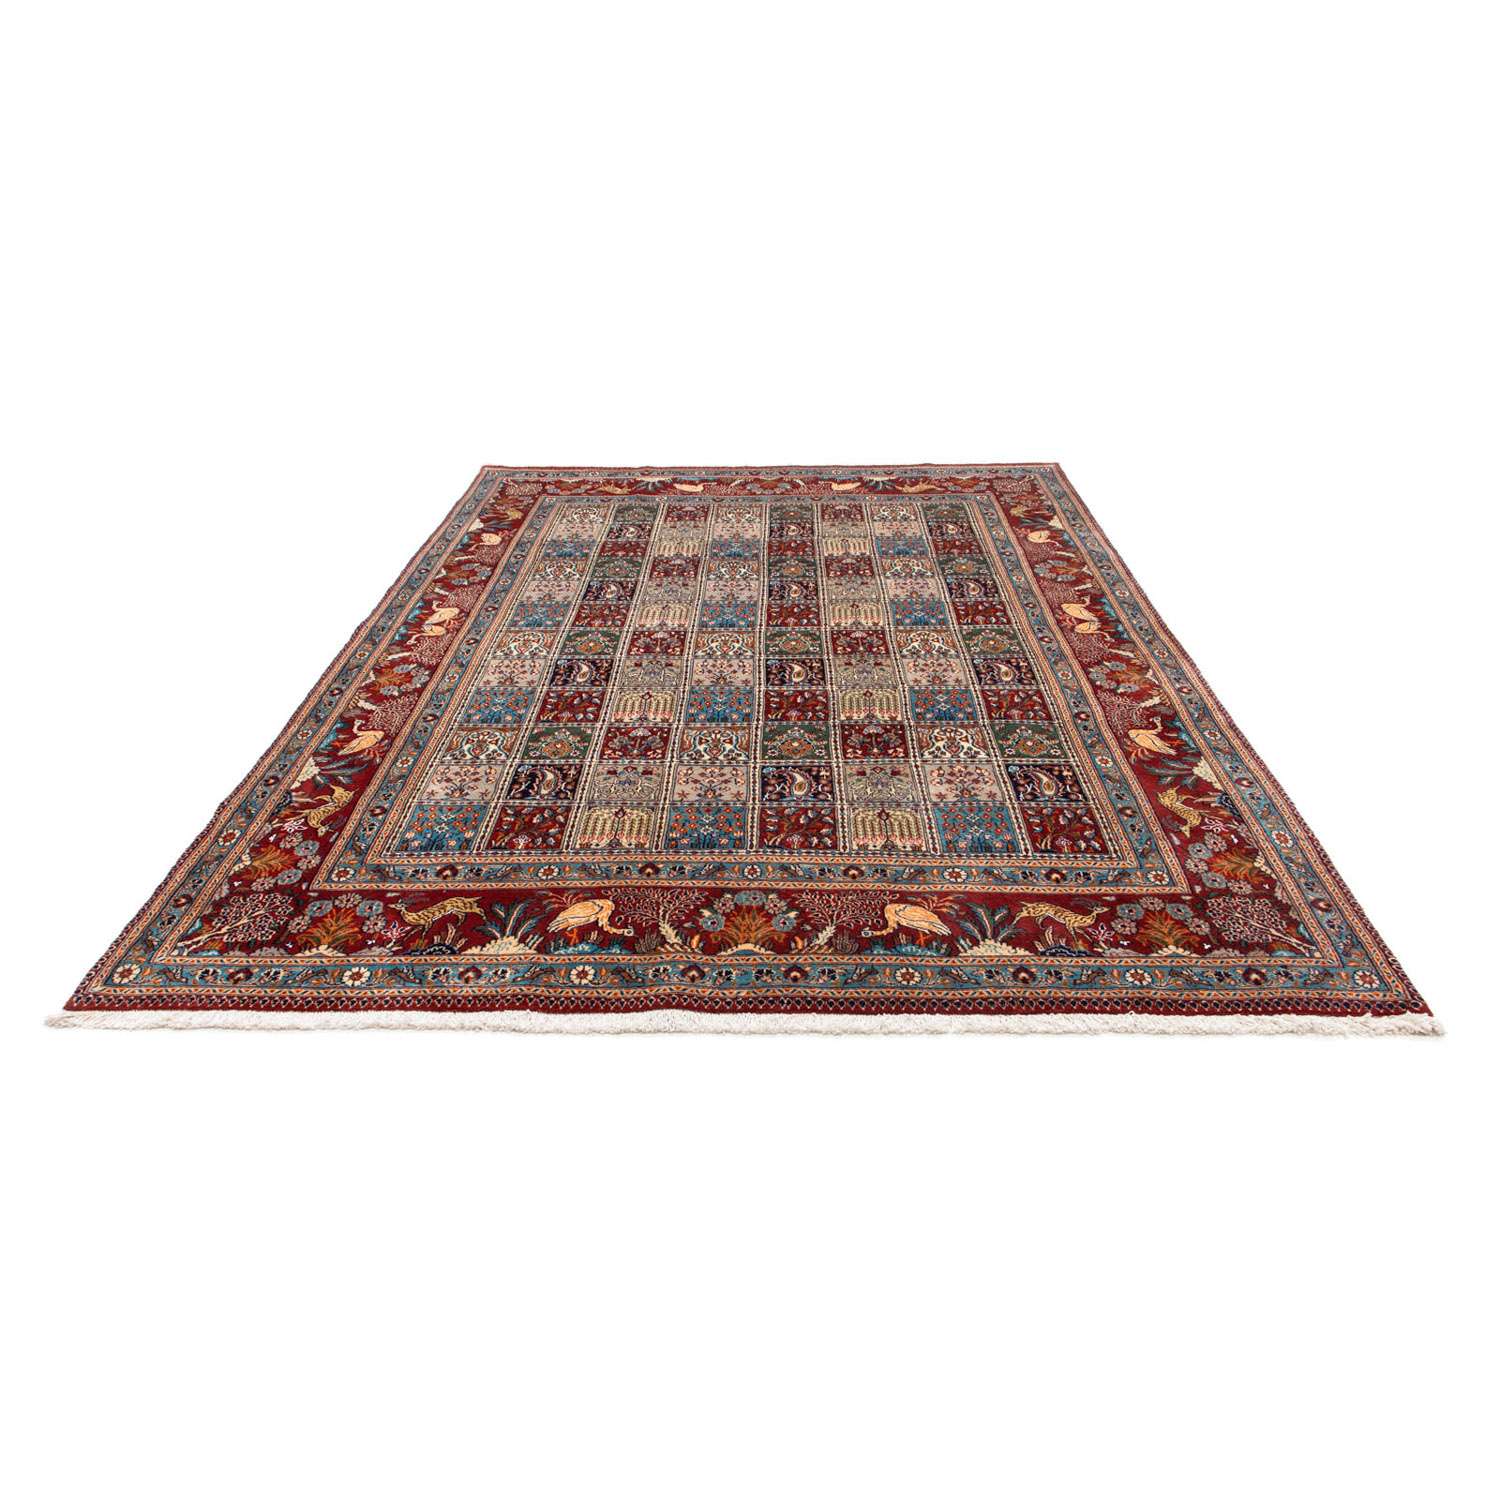 Perser Rug - Classic - 304 x 206 cm - light red